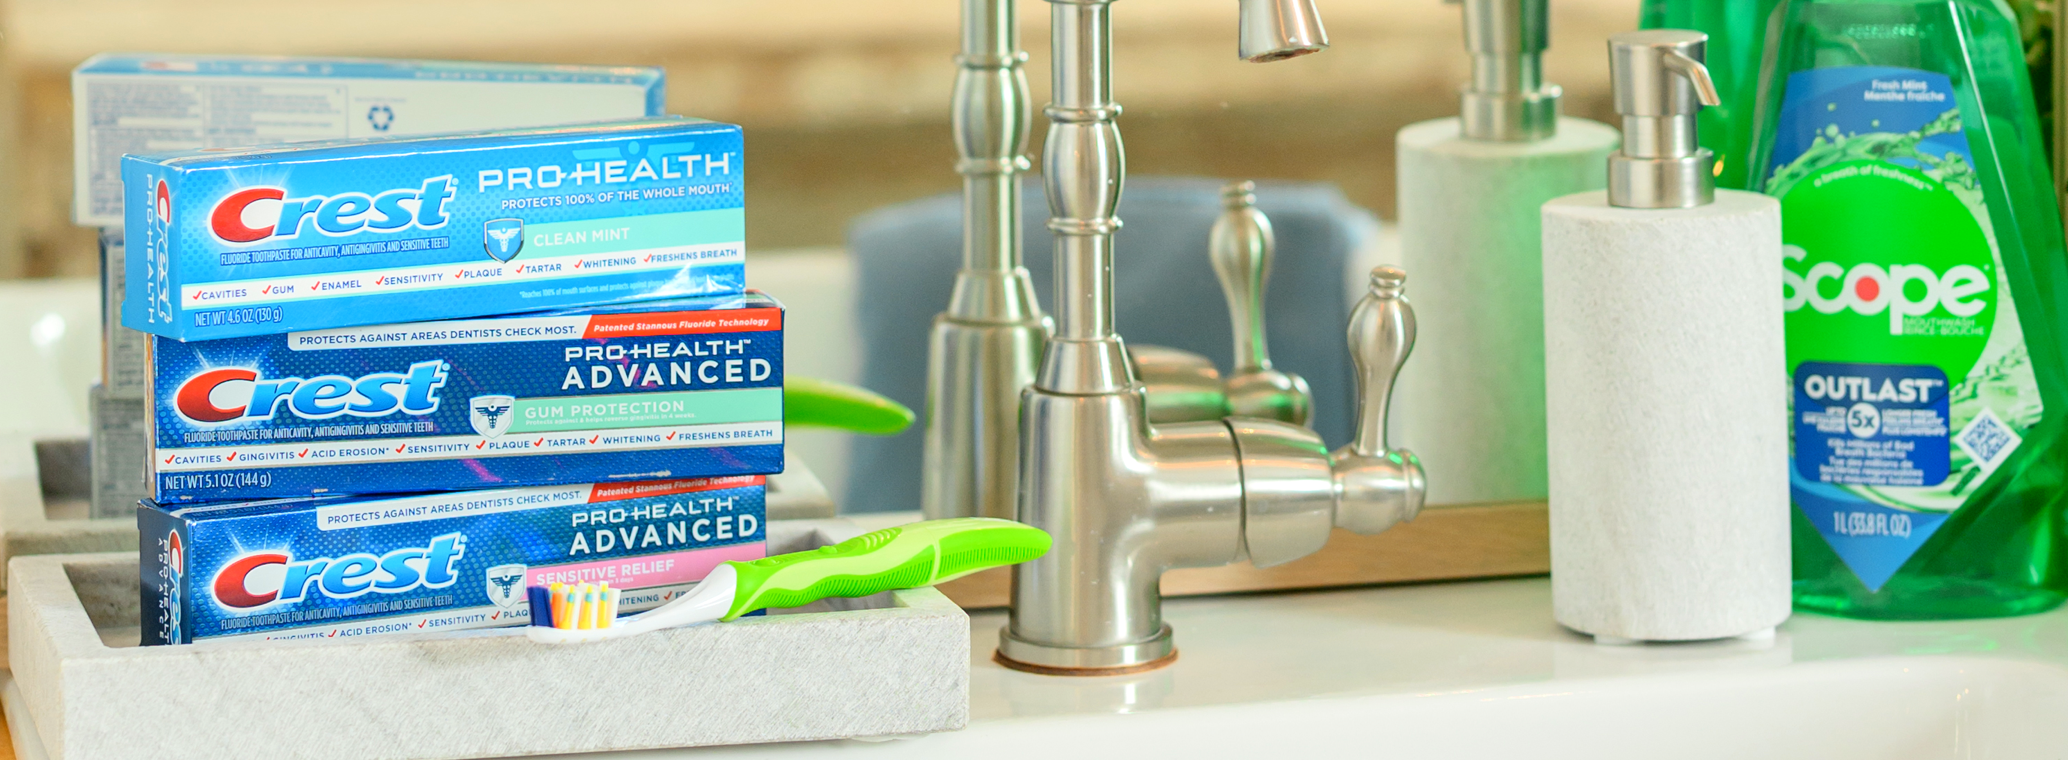 What is Crest Pro-Health Toothpaste and How Does it Work?